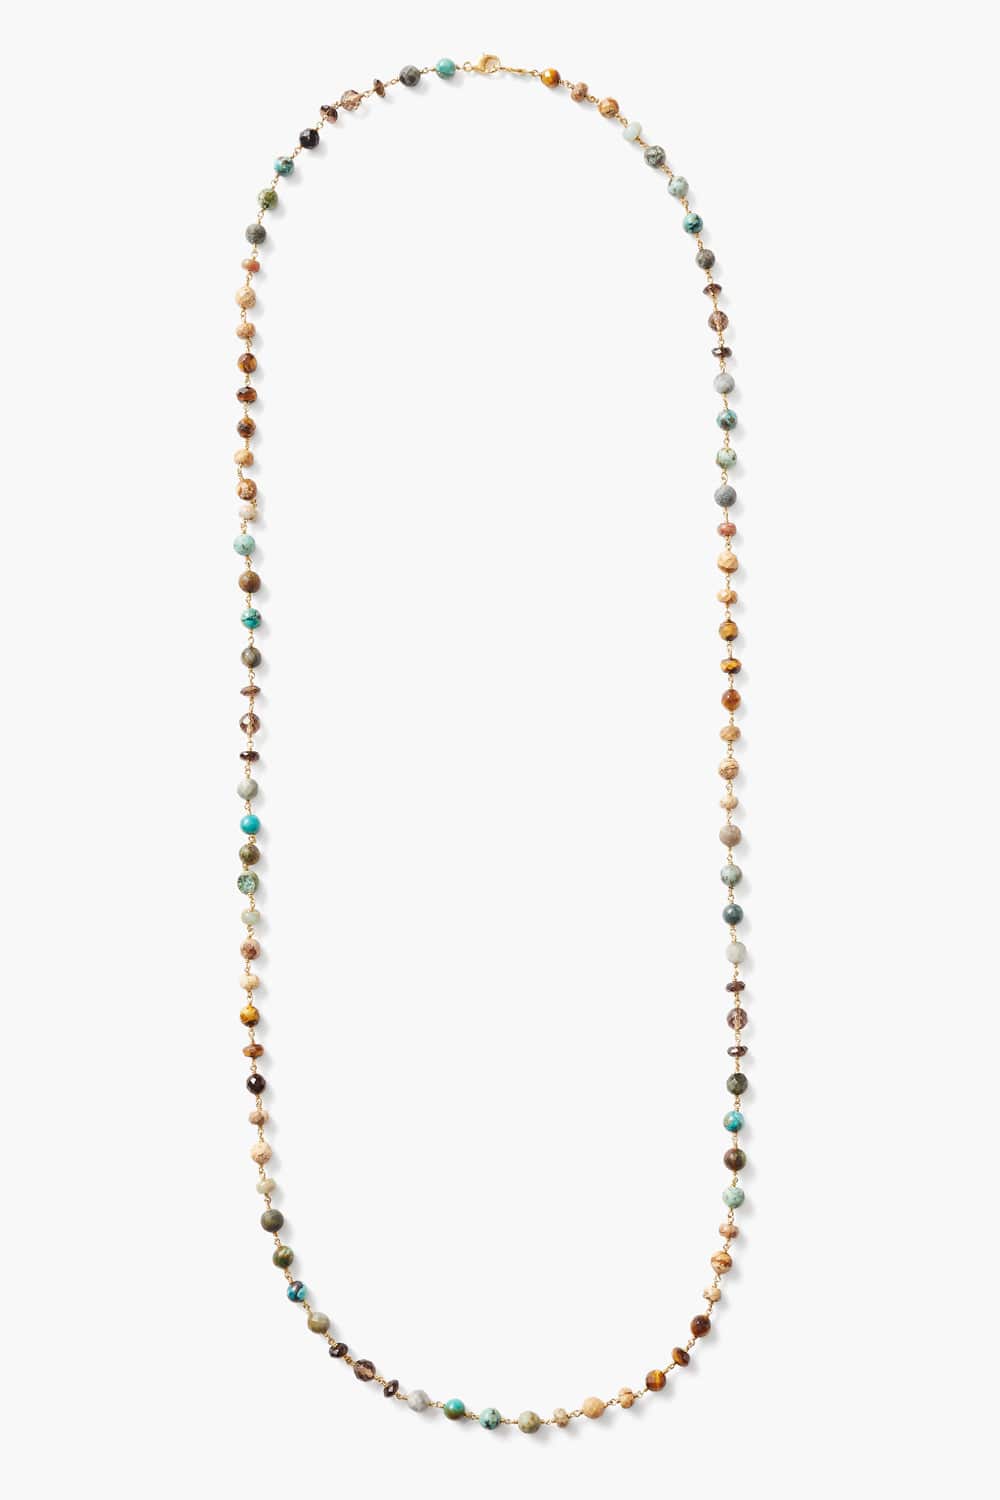 NKL-GPL Long Mixed Turquoise Chain Necklace